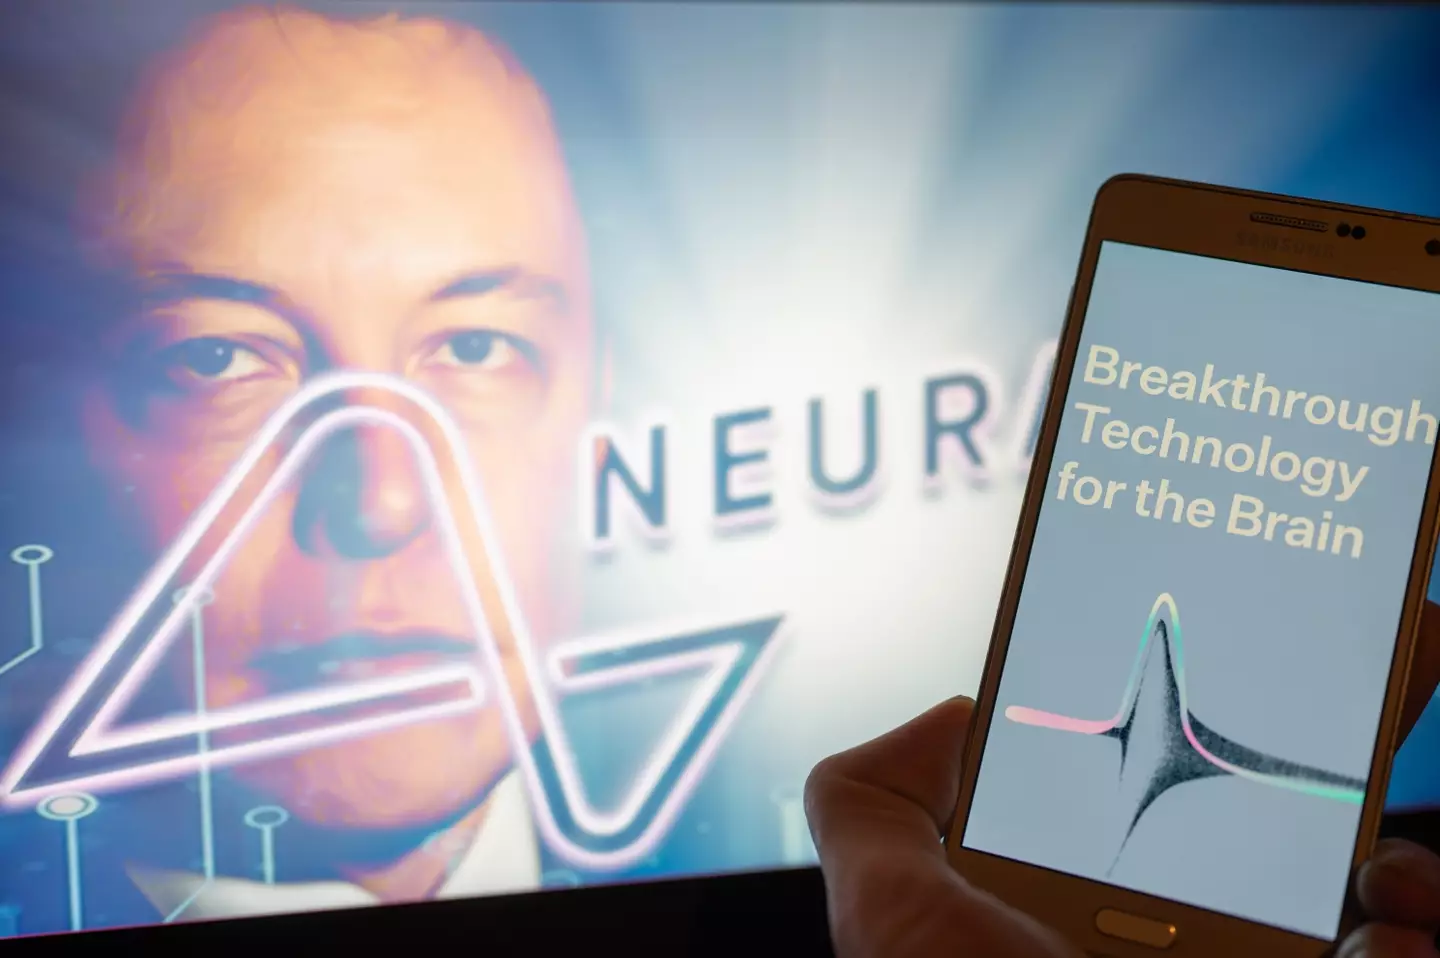 Neuralink hopes the brain chip could help people with brain disorders and spinal injuries.